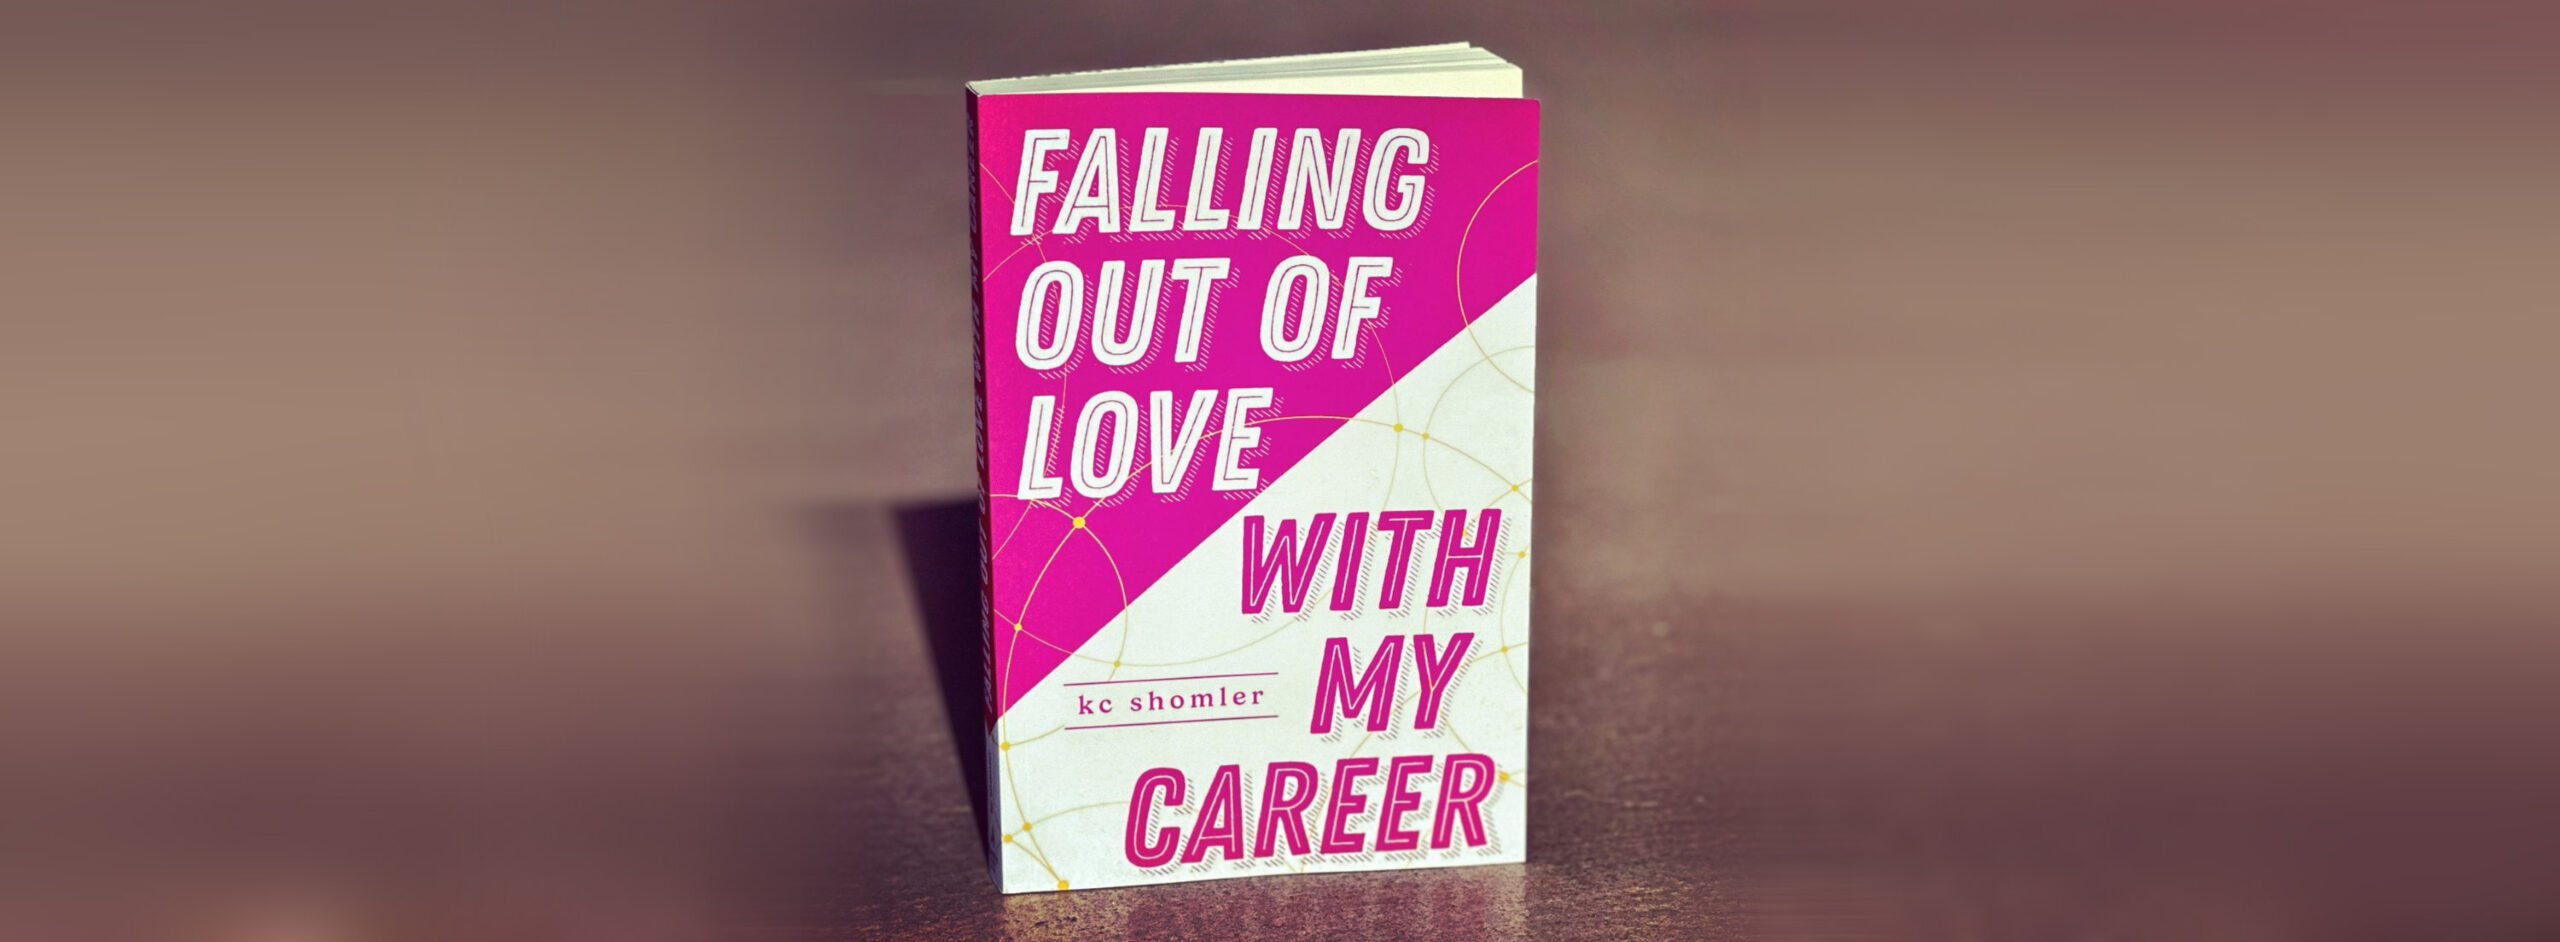 Falling Out of Love with My Career - by KC Shomler